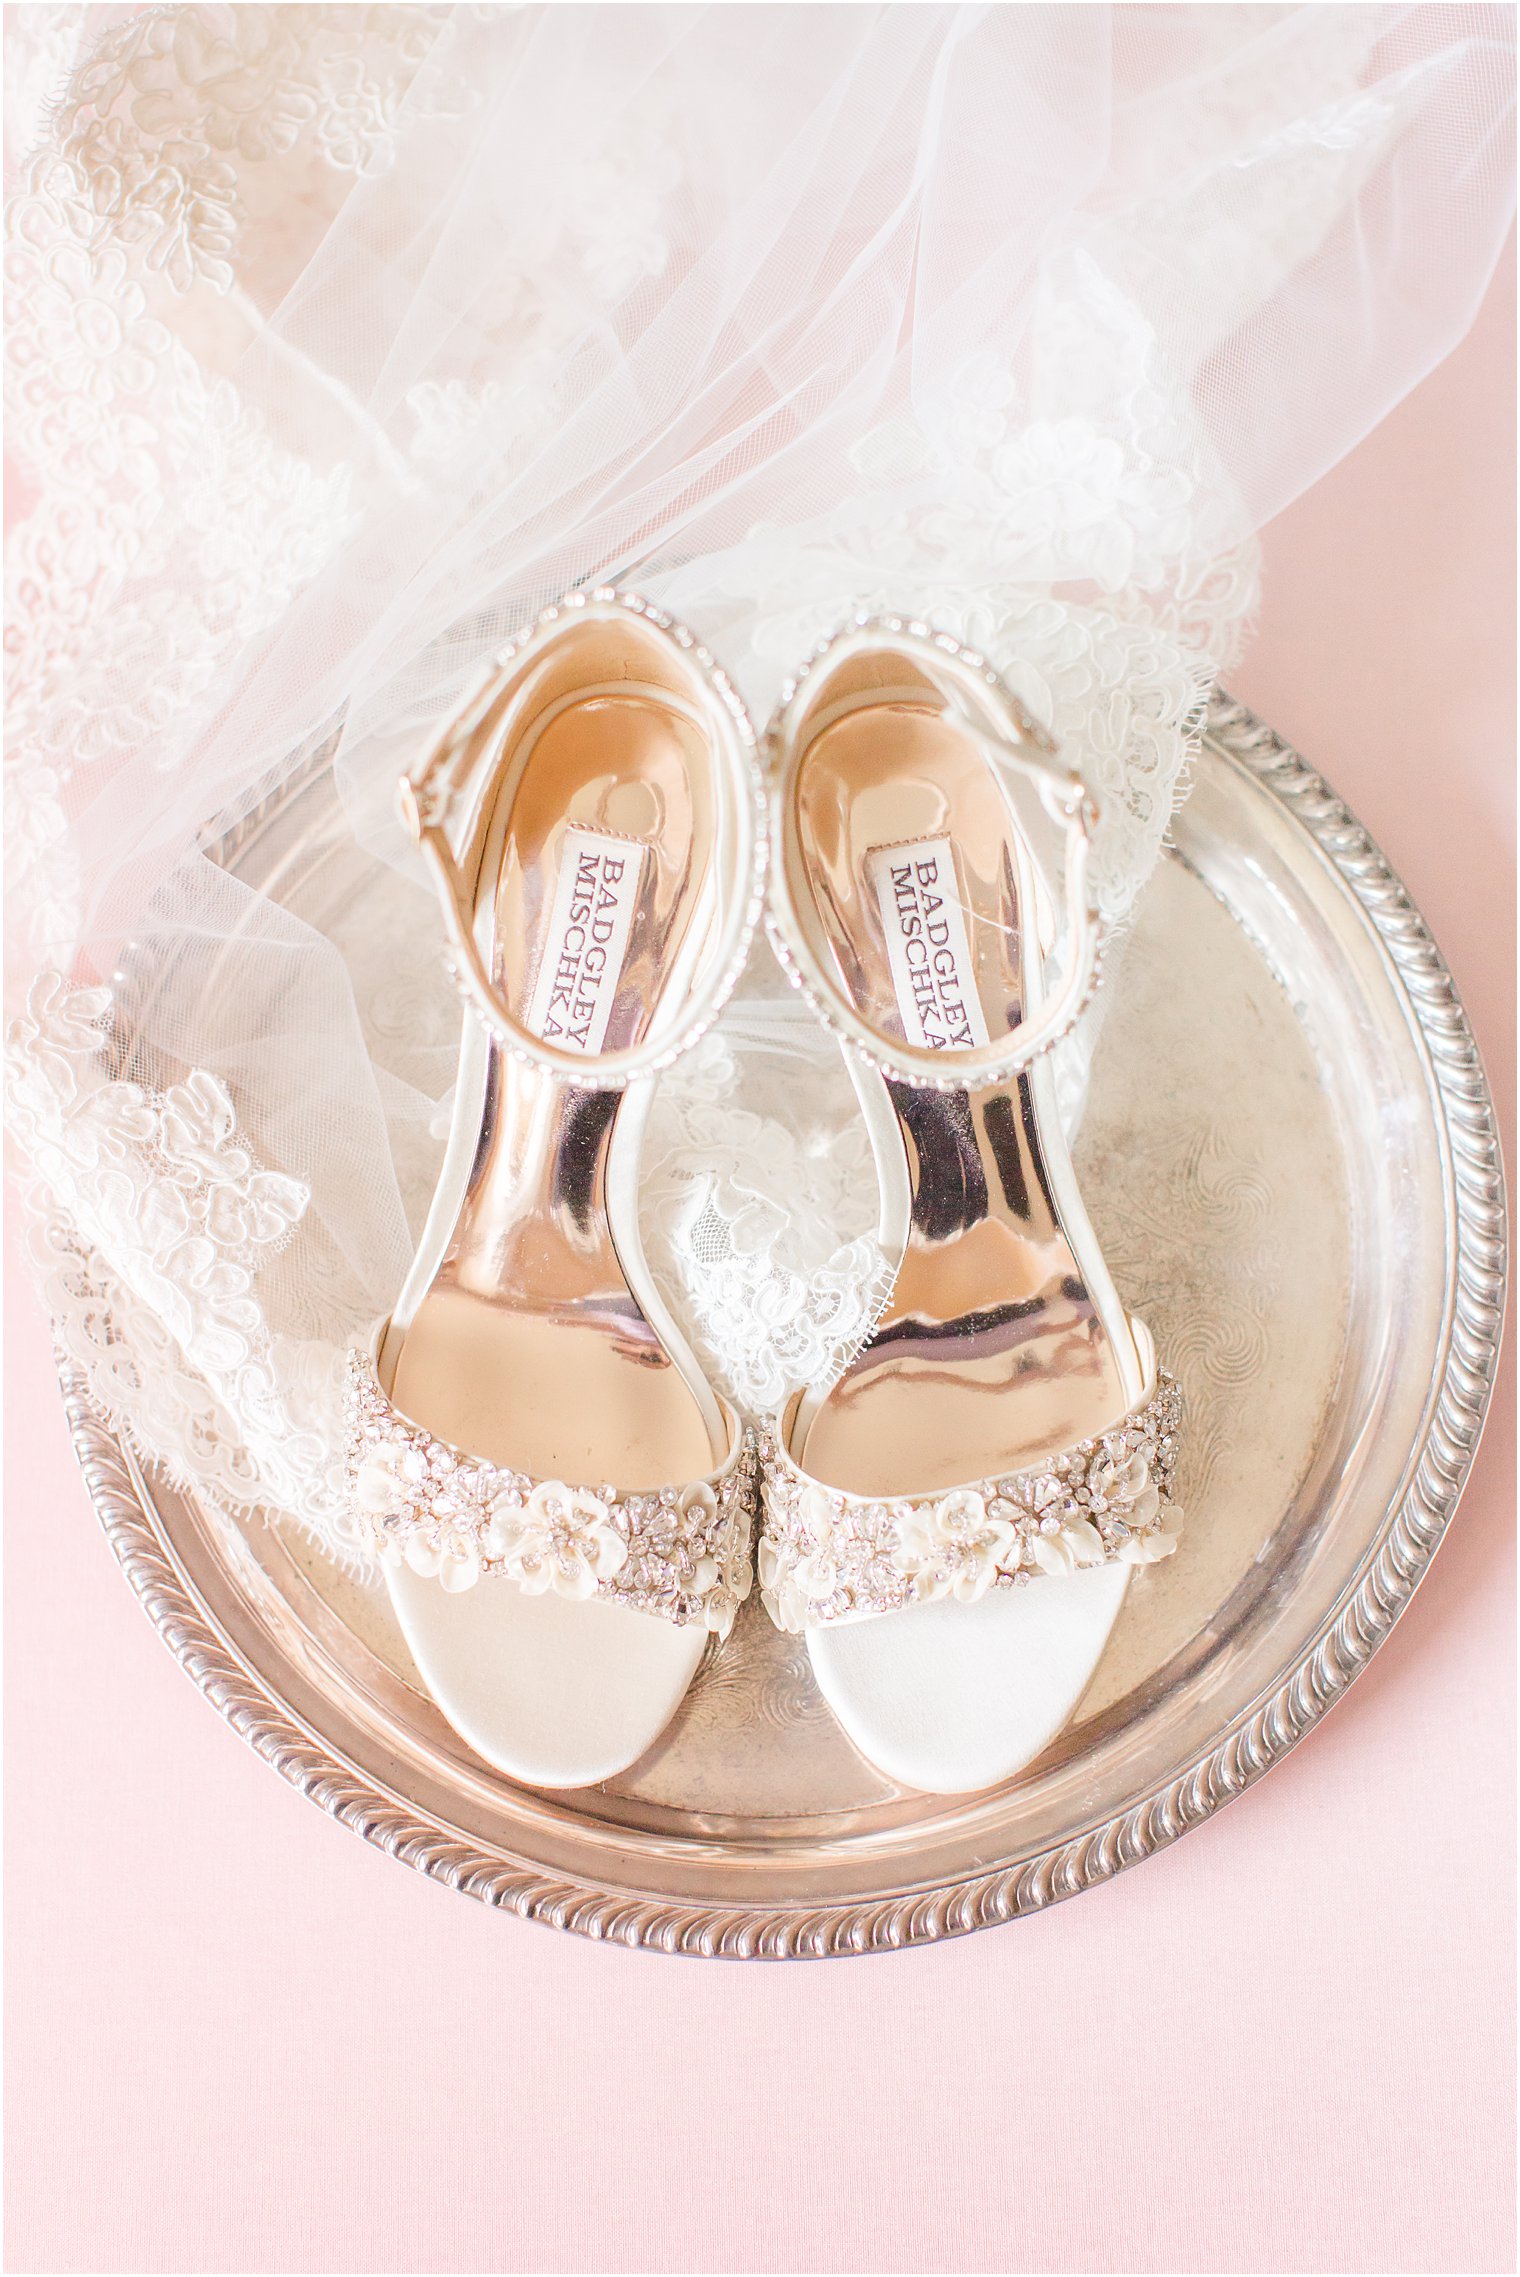 The Top Designers of Wedding Shoes (with photos) // Wedding Blog